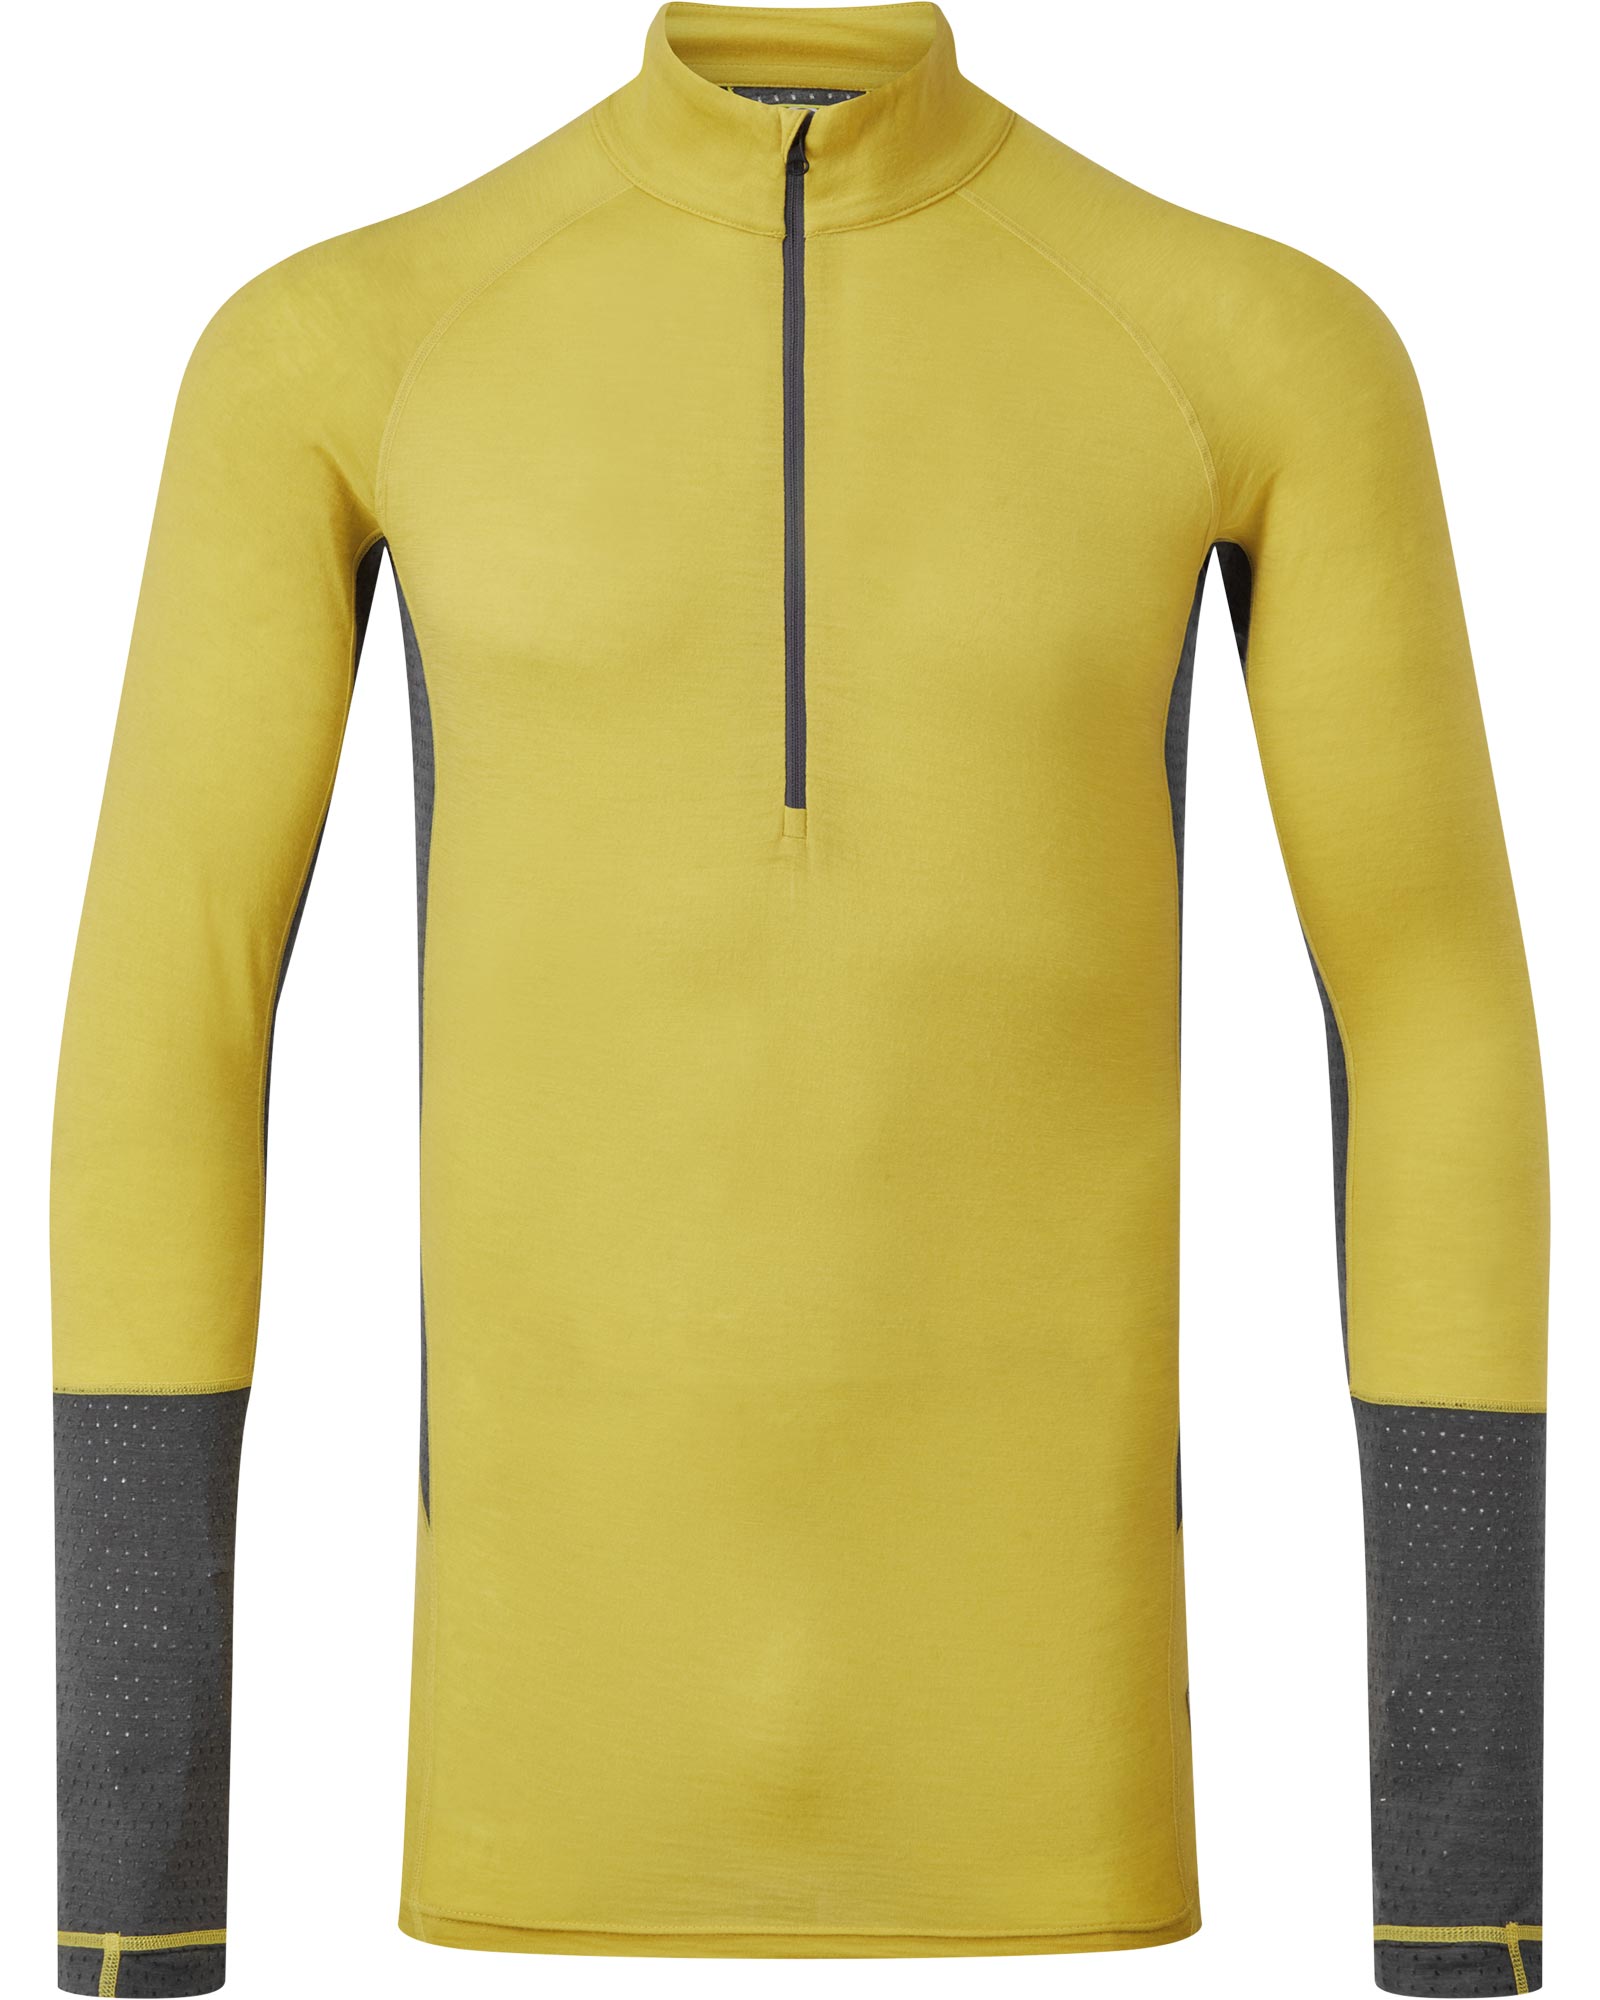 Product image of Artilect Goldhill 125 Zoned Men's Long Sleeve Zip Neck